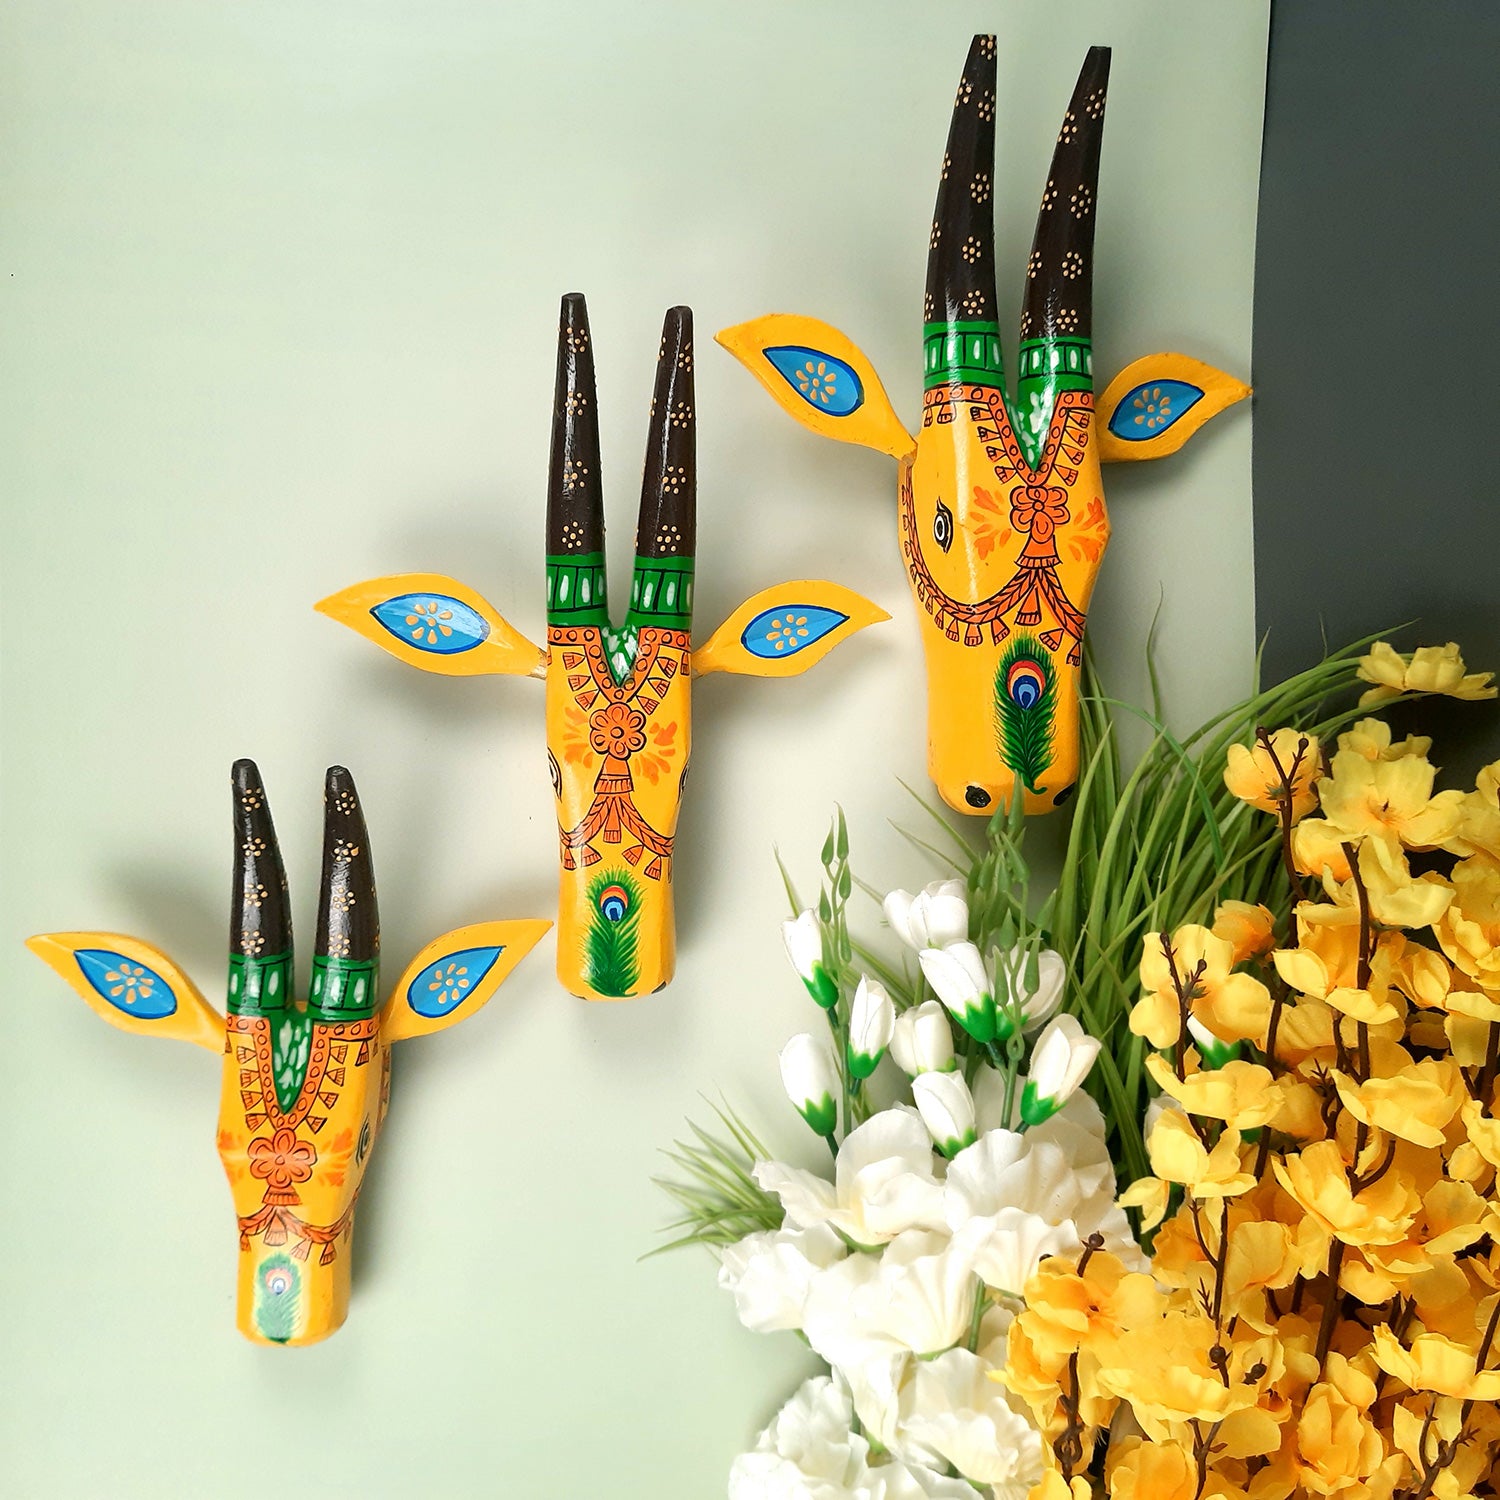 Wooden Cow Face Wall Hanging | Nandi Bull Head Wall Decor With Detachable Ears | Vintage Decor - For Home, Living Room, Entrance, Puja Room Decoration & Gifts ( Set of 3) - apkamart #color_Yellow